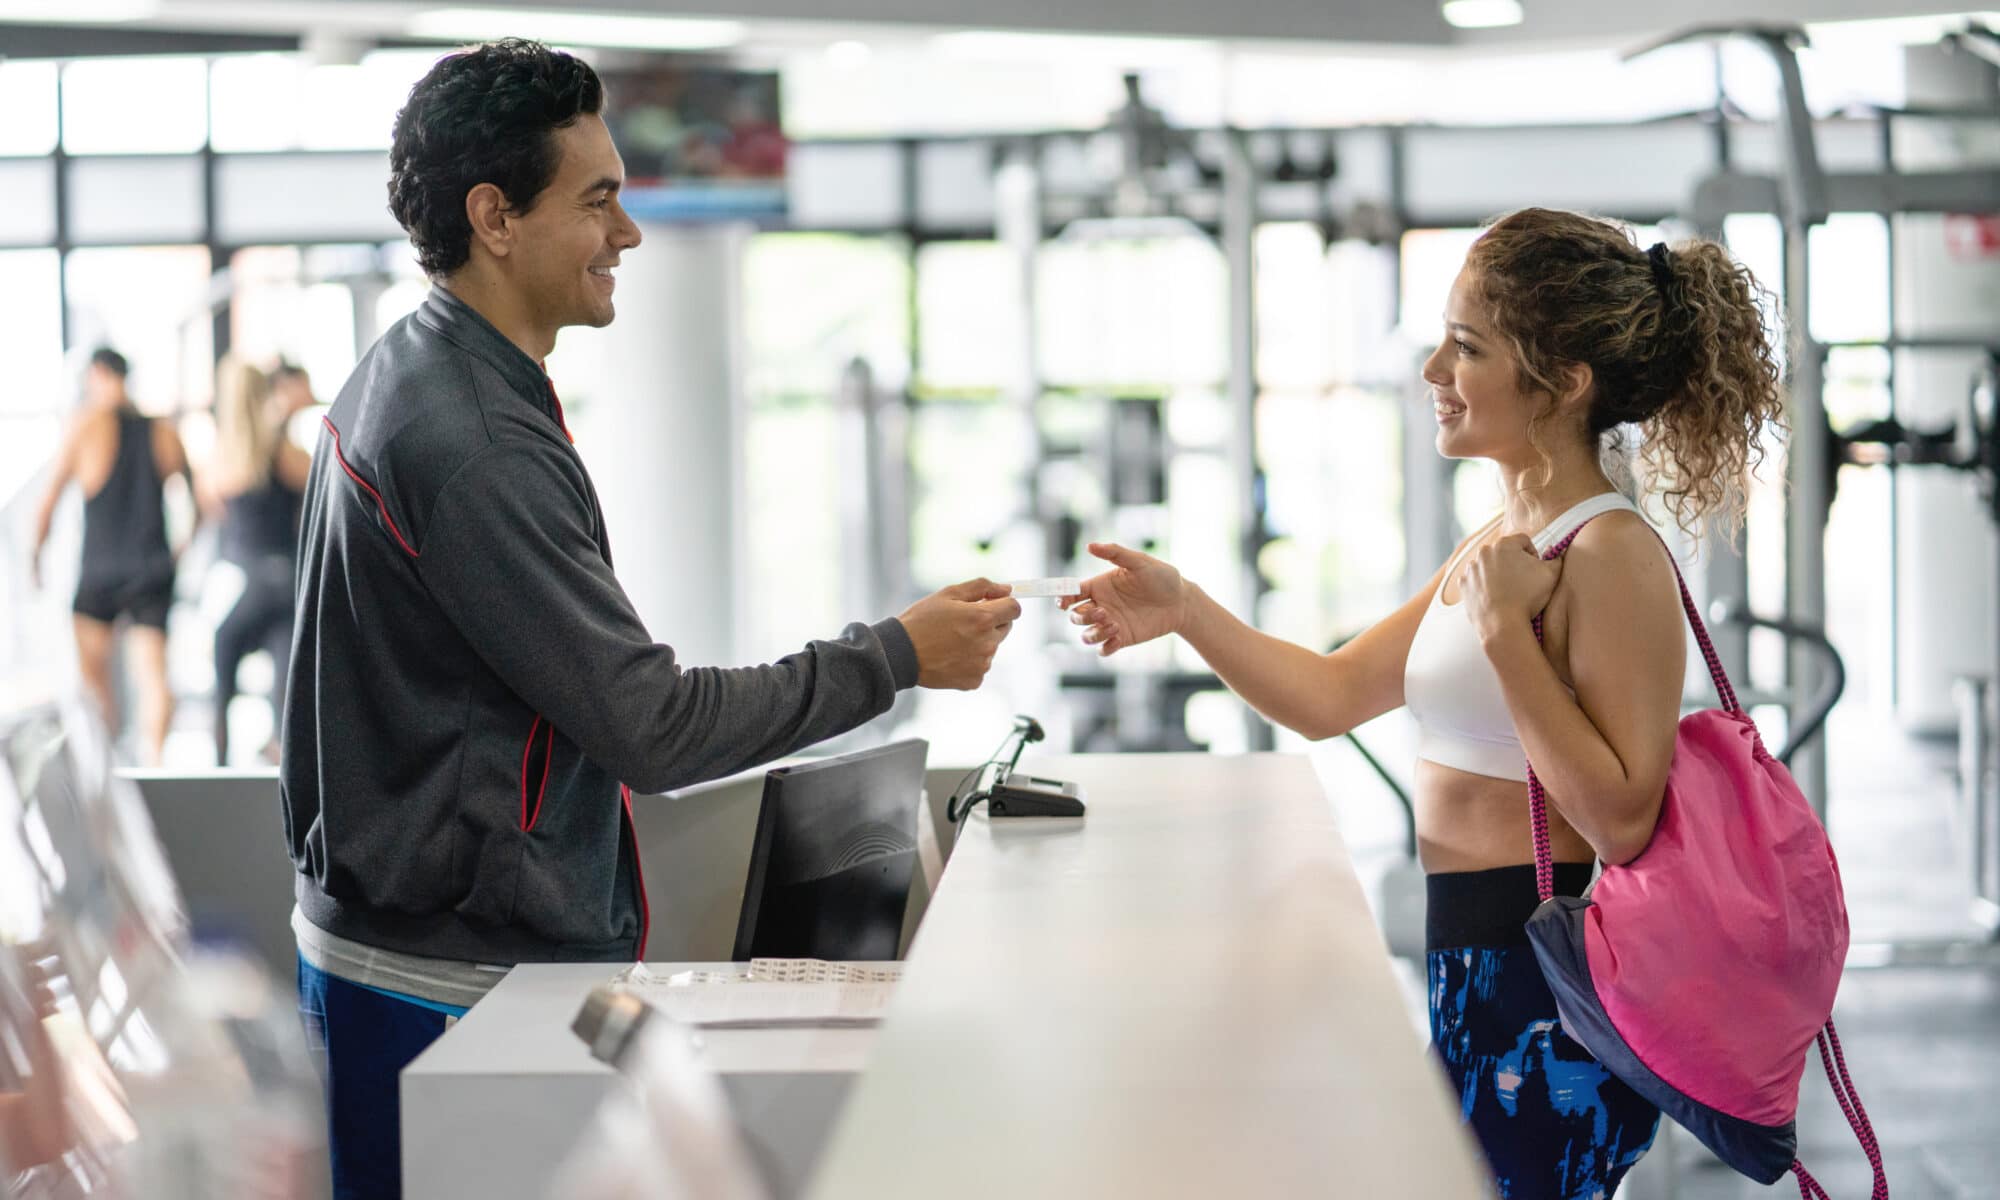 Gym and Fitness POS Point of Sale Cheerful employee at the gym handing a credit card back to female customer